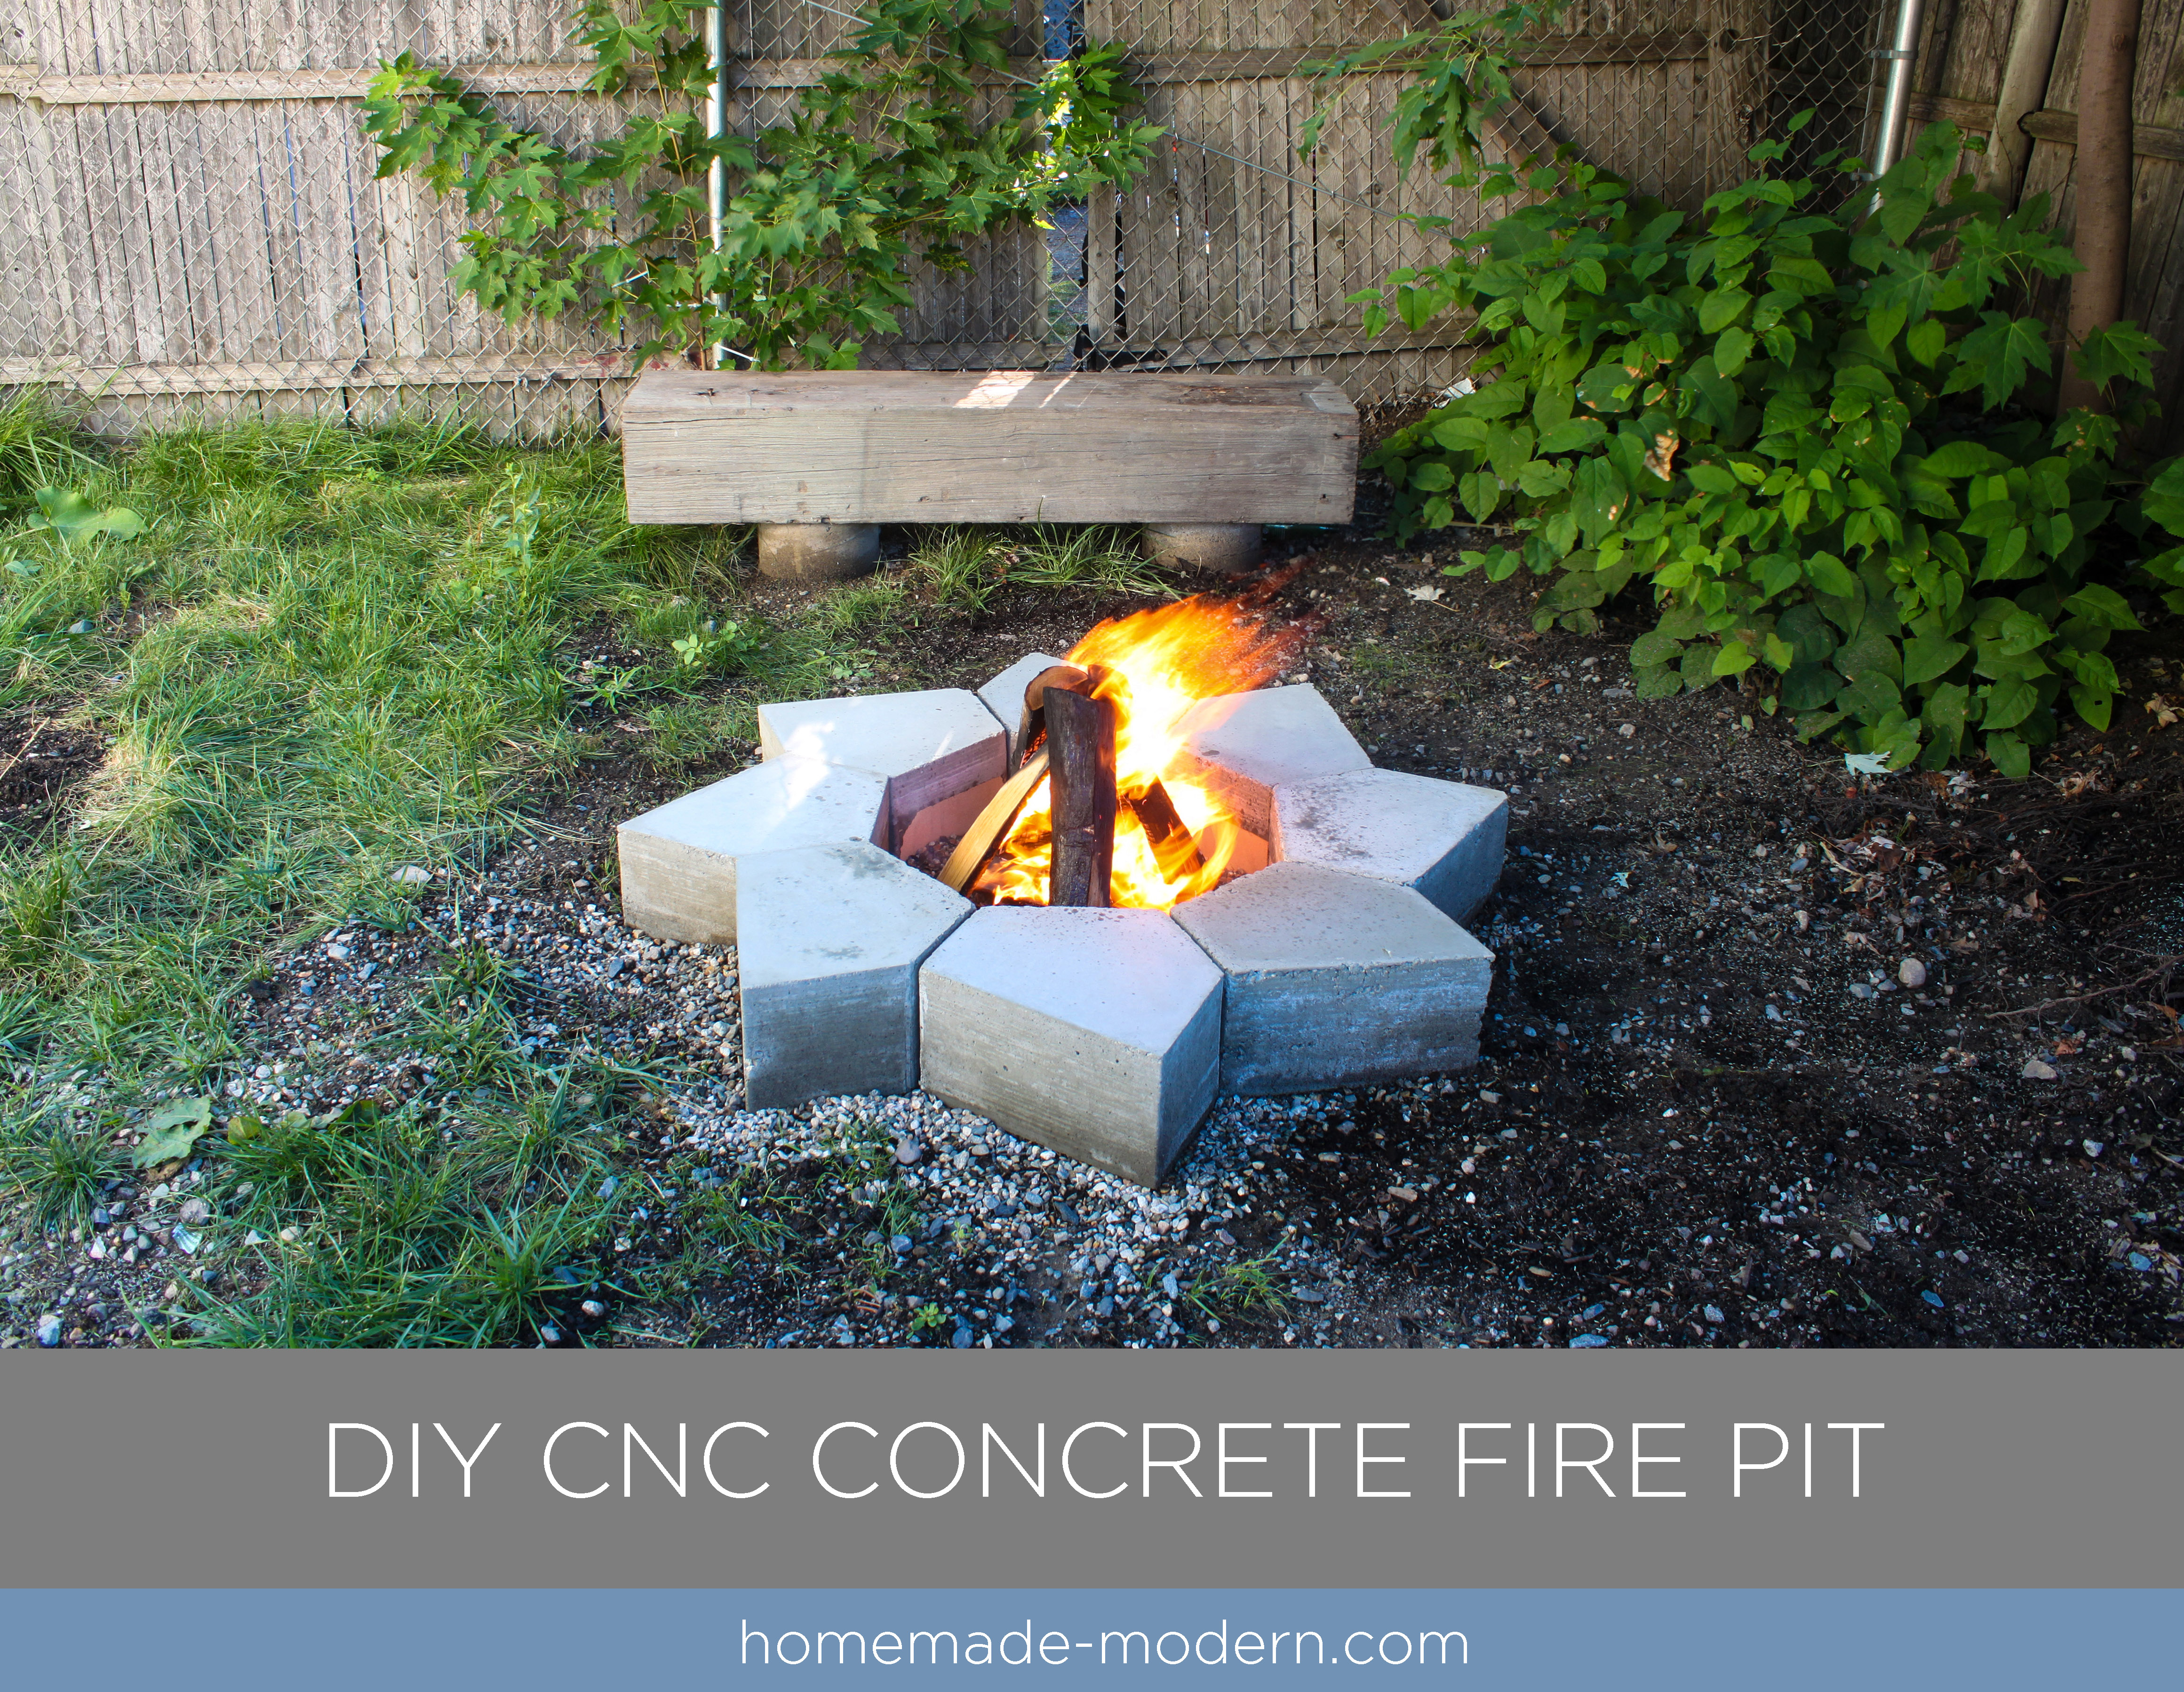 This modular modern concrete fire pit was made from Quikrete 5000 and cost less than $120 to build. The forms for the pieces were made with a small CNC machine. For more information go to HomeMade-Modern.com